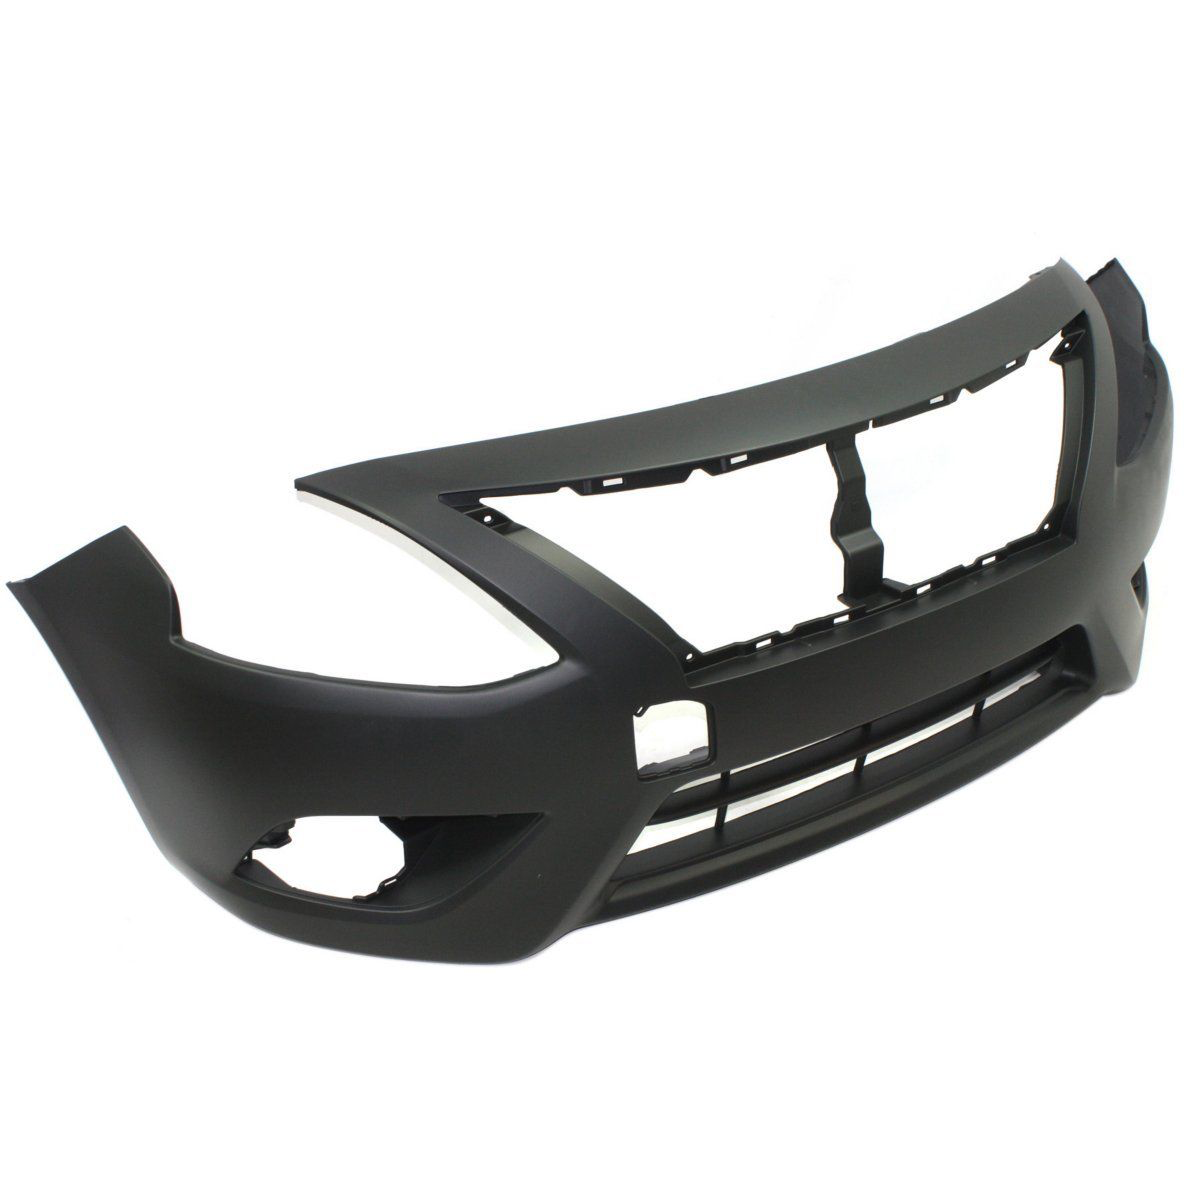 2015-2016 NISSAN VERSA Front Bumper Cover Sedan  w/o Chrome Insert Painted to Match